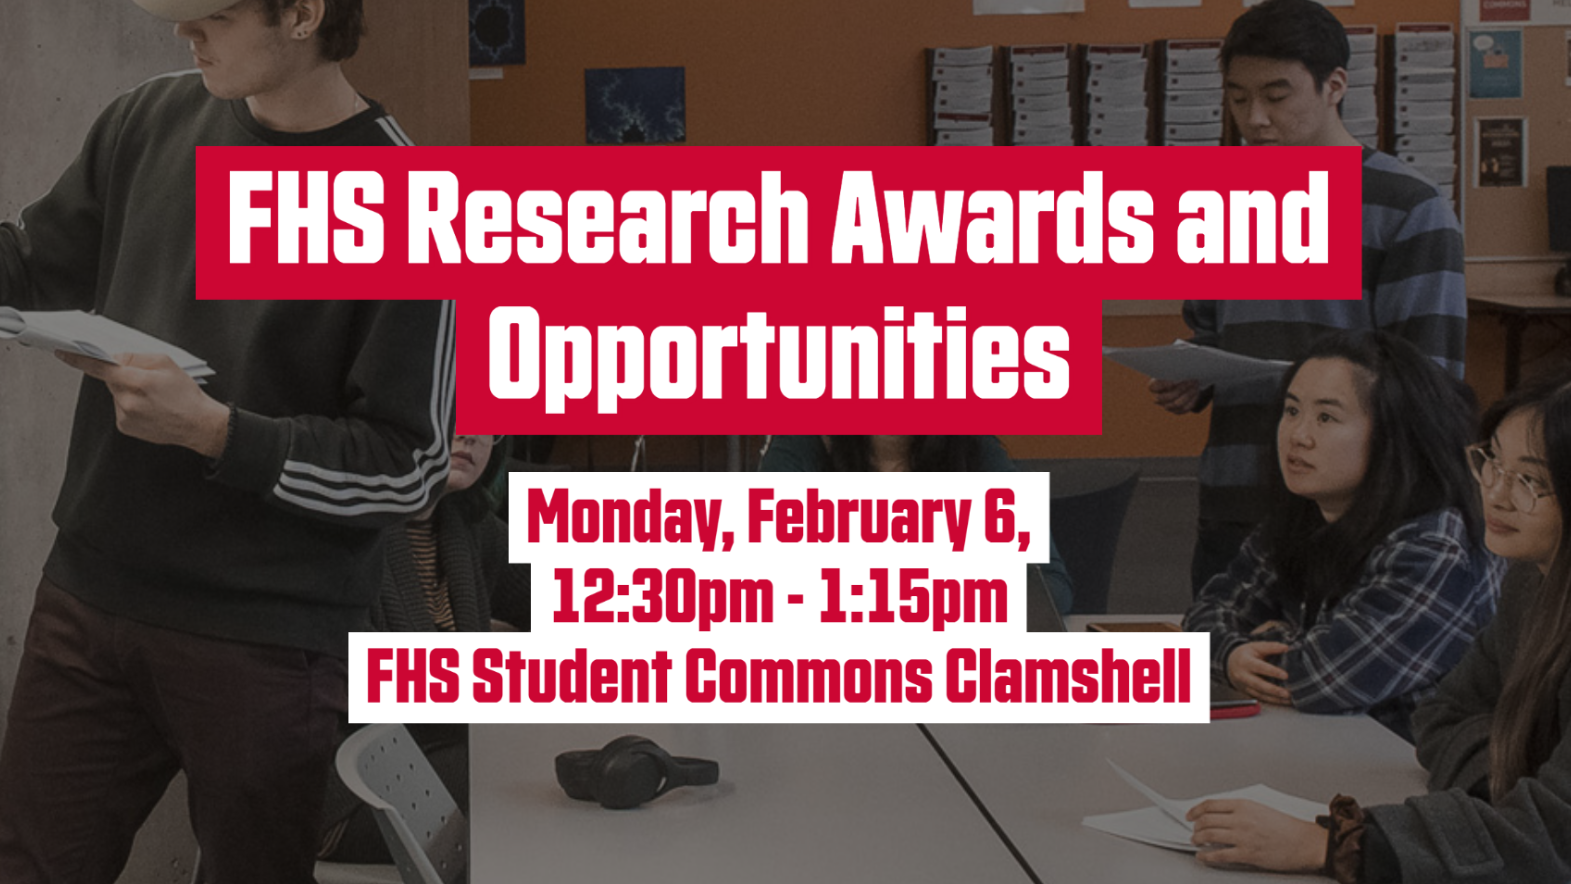 Monday, Feb 6: Research Awards and Opportunities